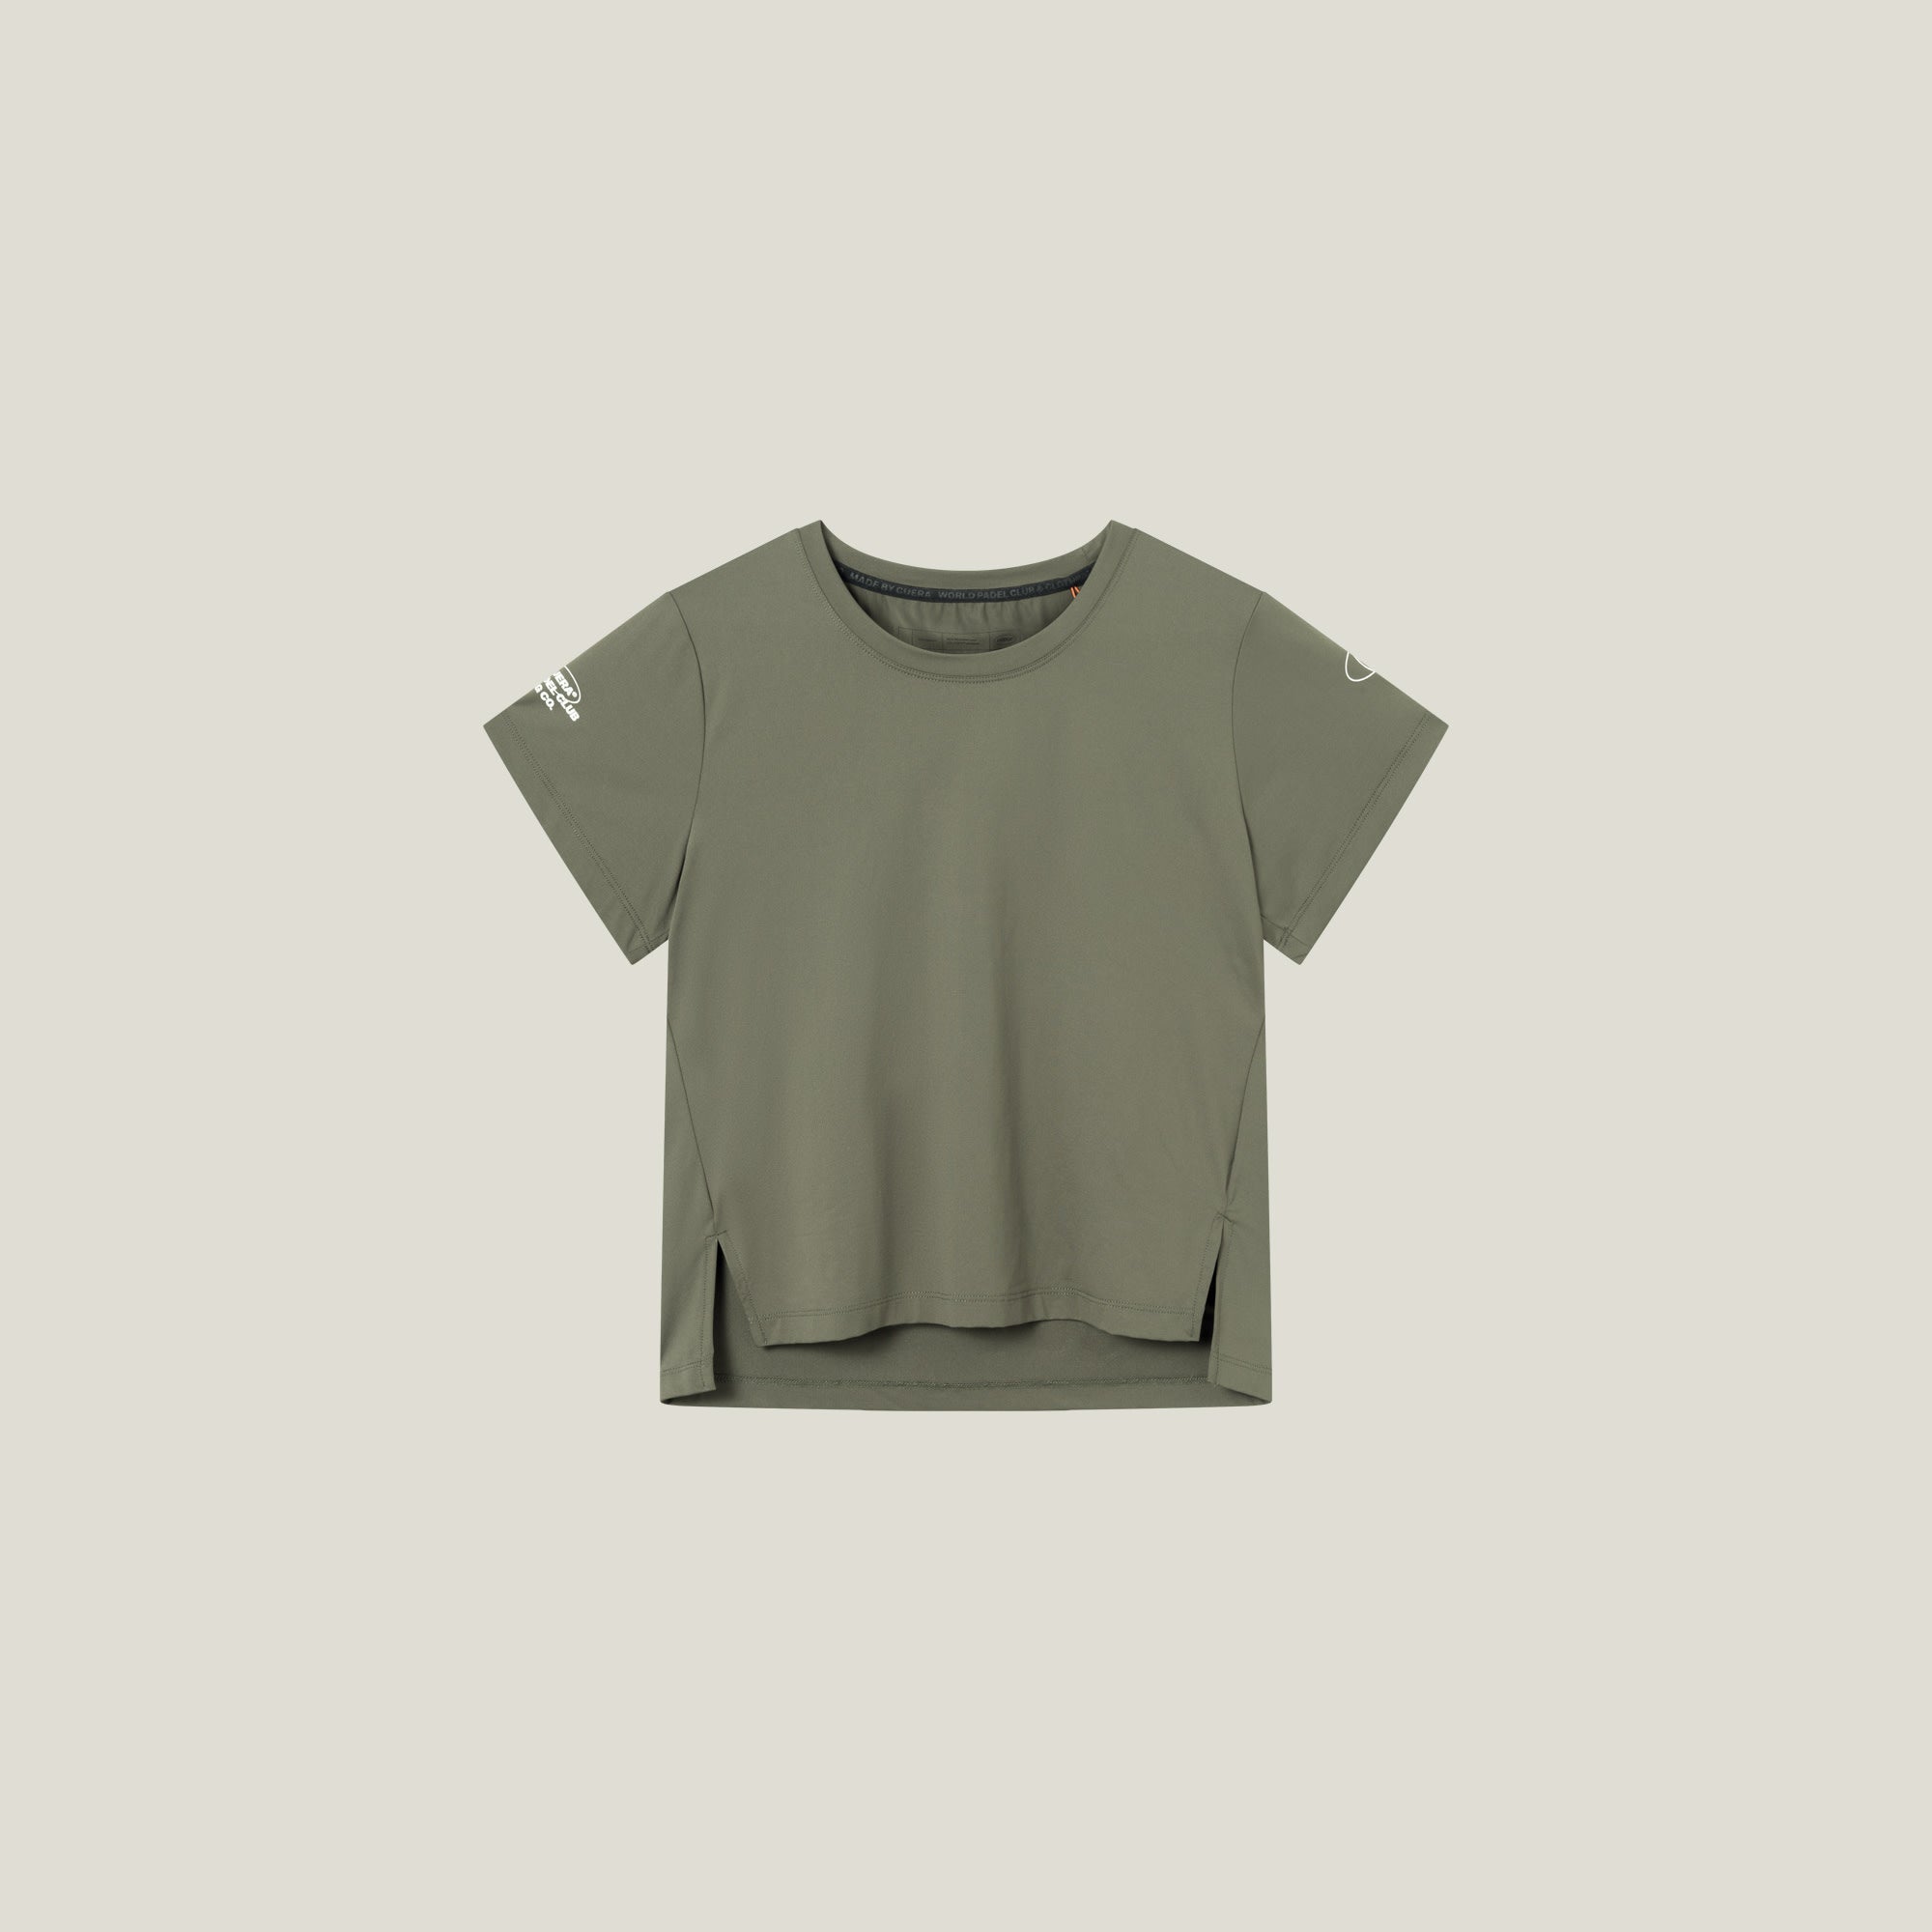 Oncourt Crop WPC  T-Shirt - Army